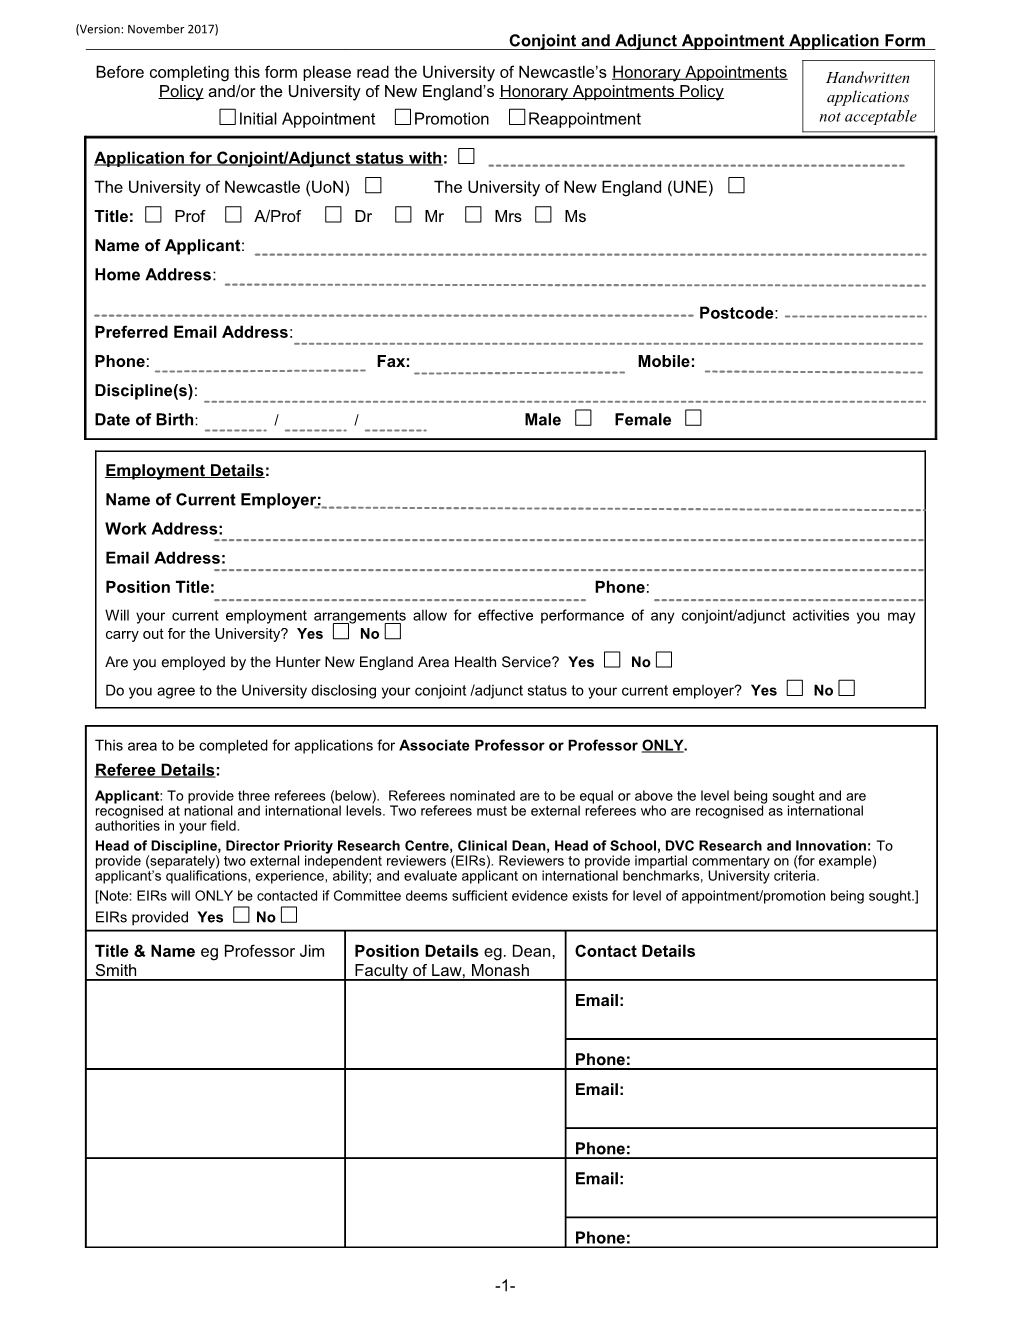 Conjoint Appointment Application Form